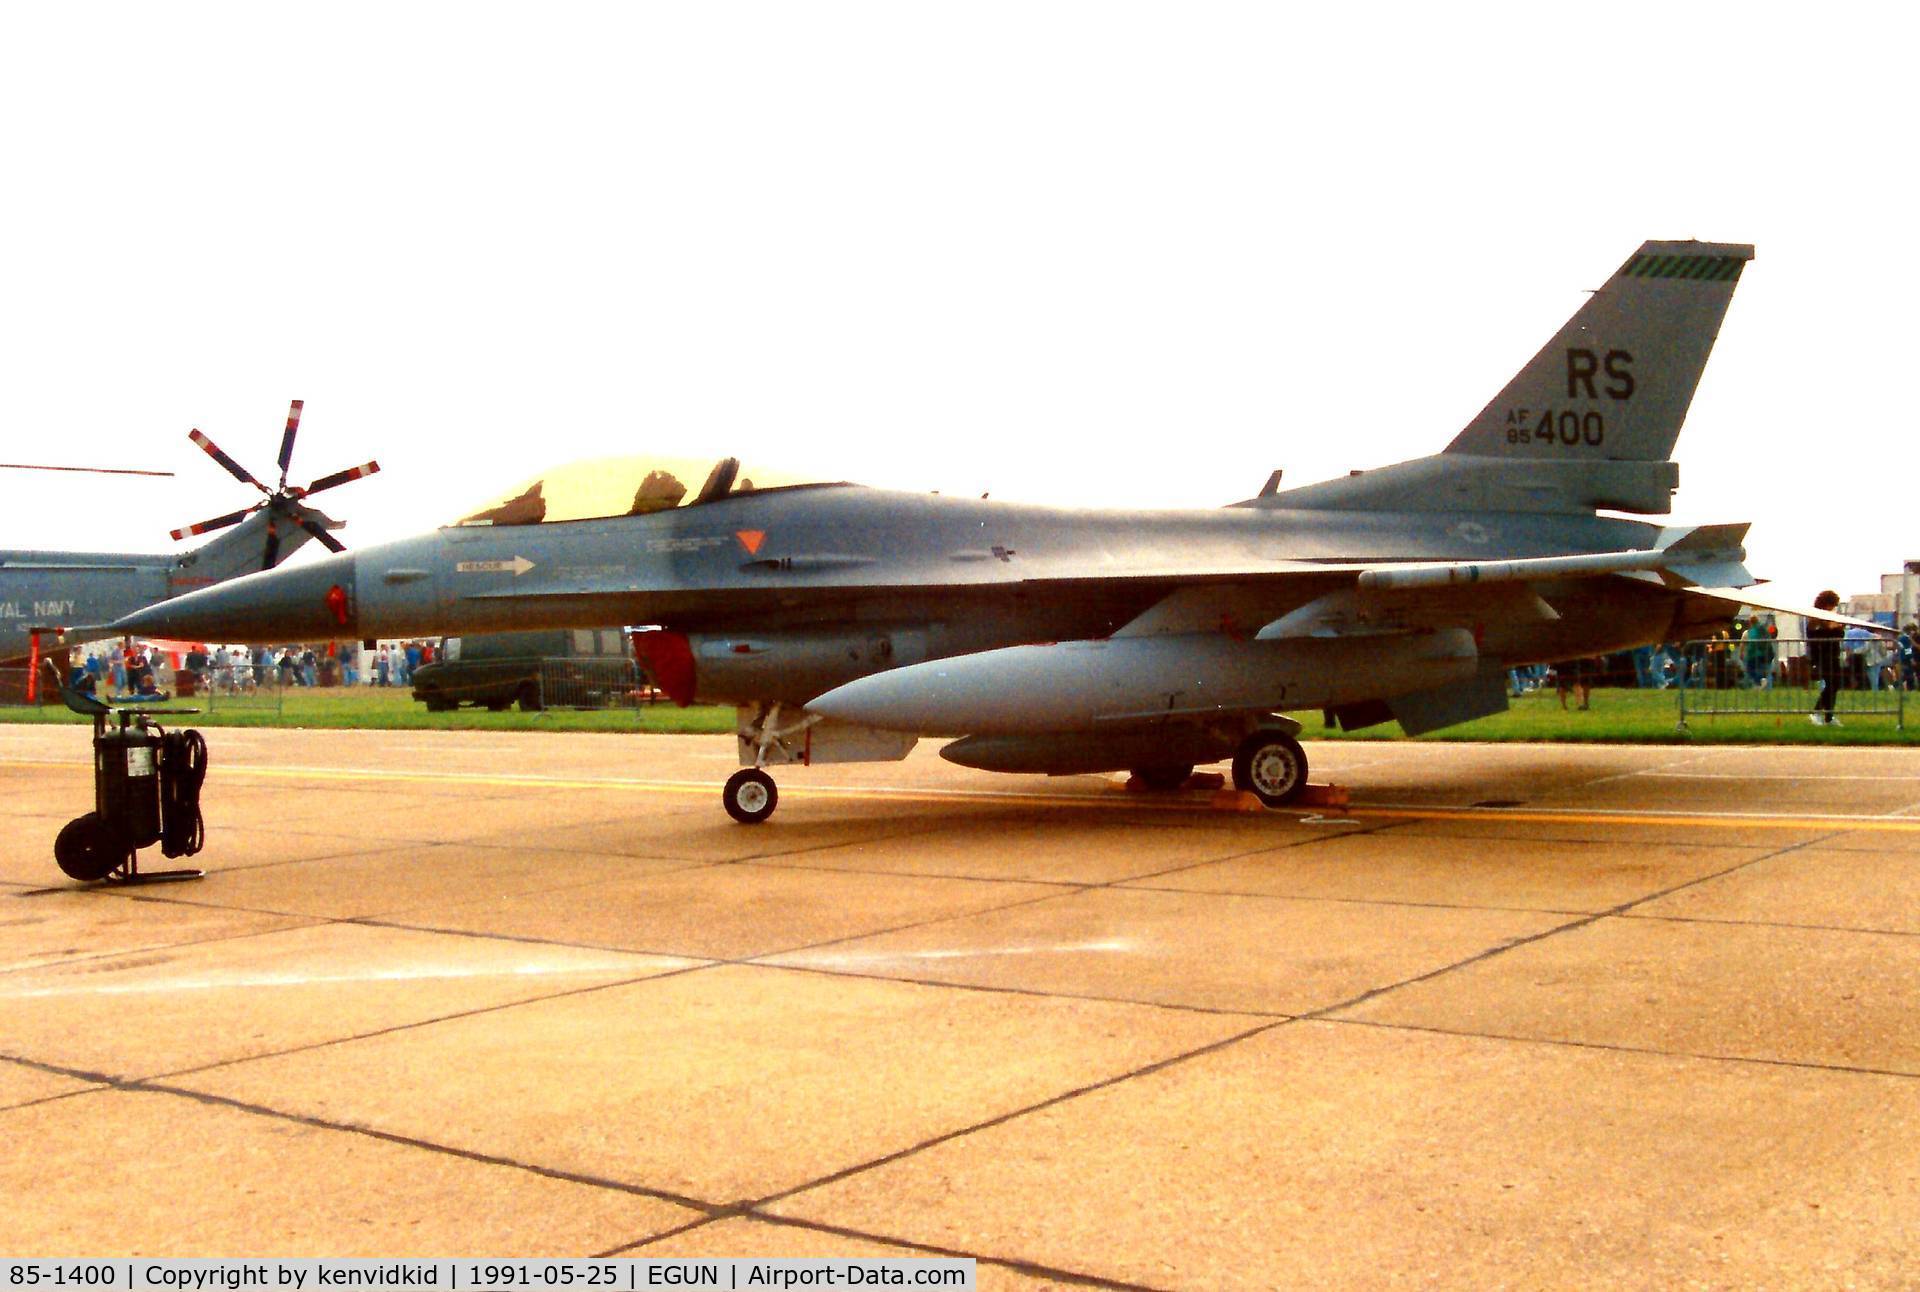 85-1400, 1985 General Dynamics F-16C Fighting Falcon C/N 5C-180, At the 1991 Mildenhall Air Fete. Scanned from print.